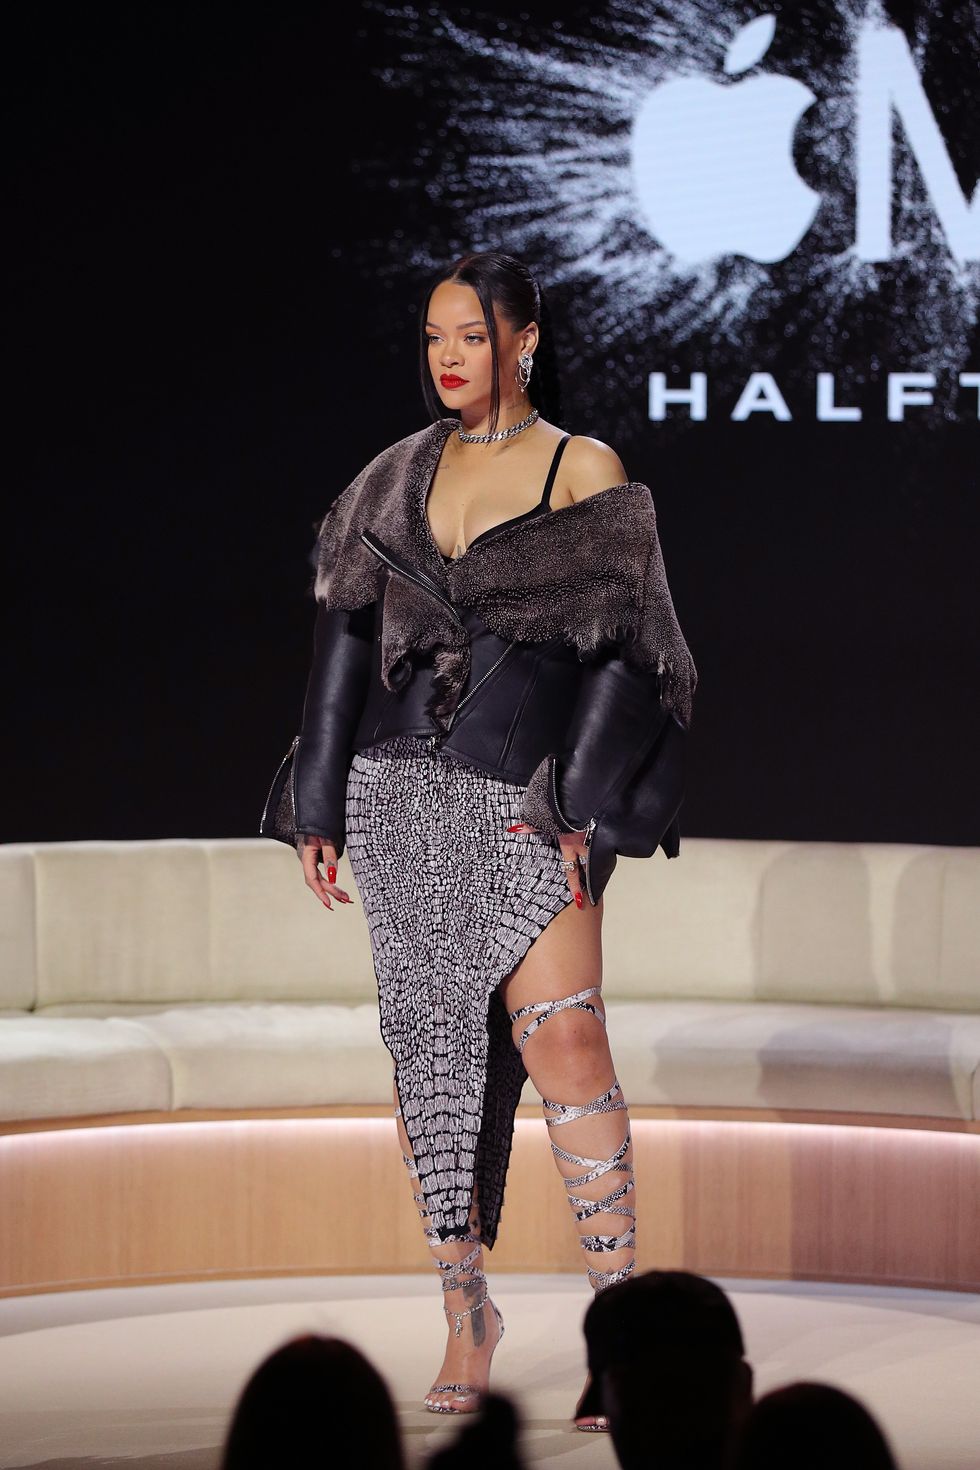 phoenix, arizona february 09 rihanna poses during the super bowl lvii pregame apple music halftime show press conference at phoenix convention center on february 09, 2023 in phoenix, arizona photo by mike lawriegetty images